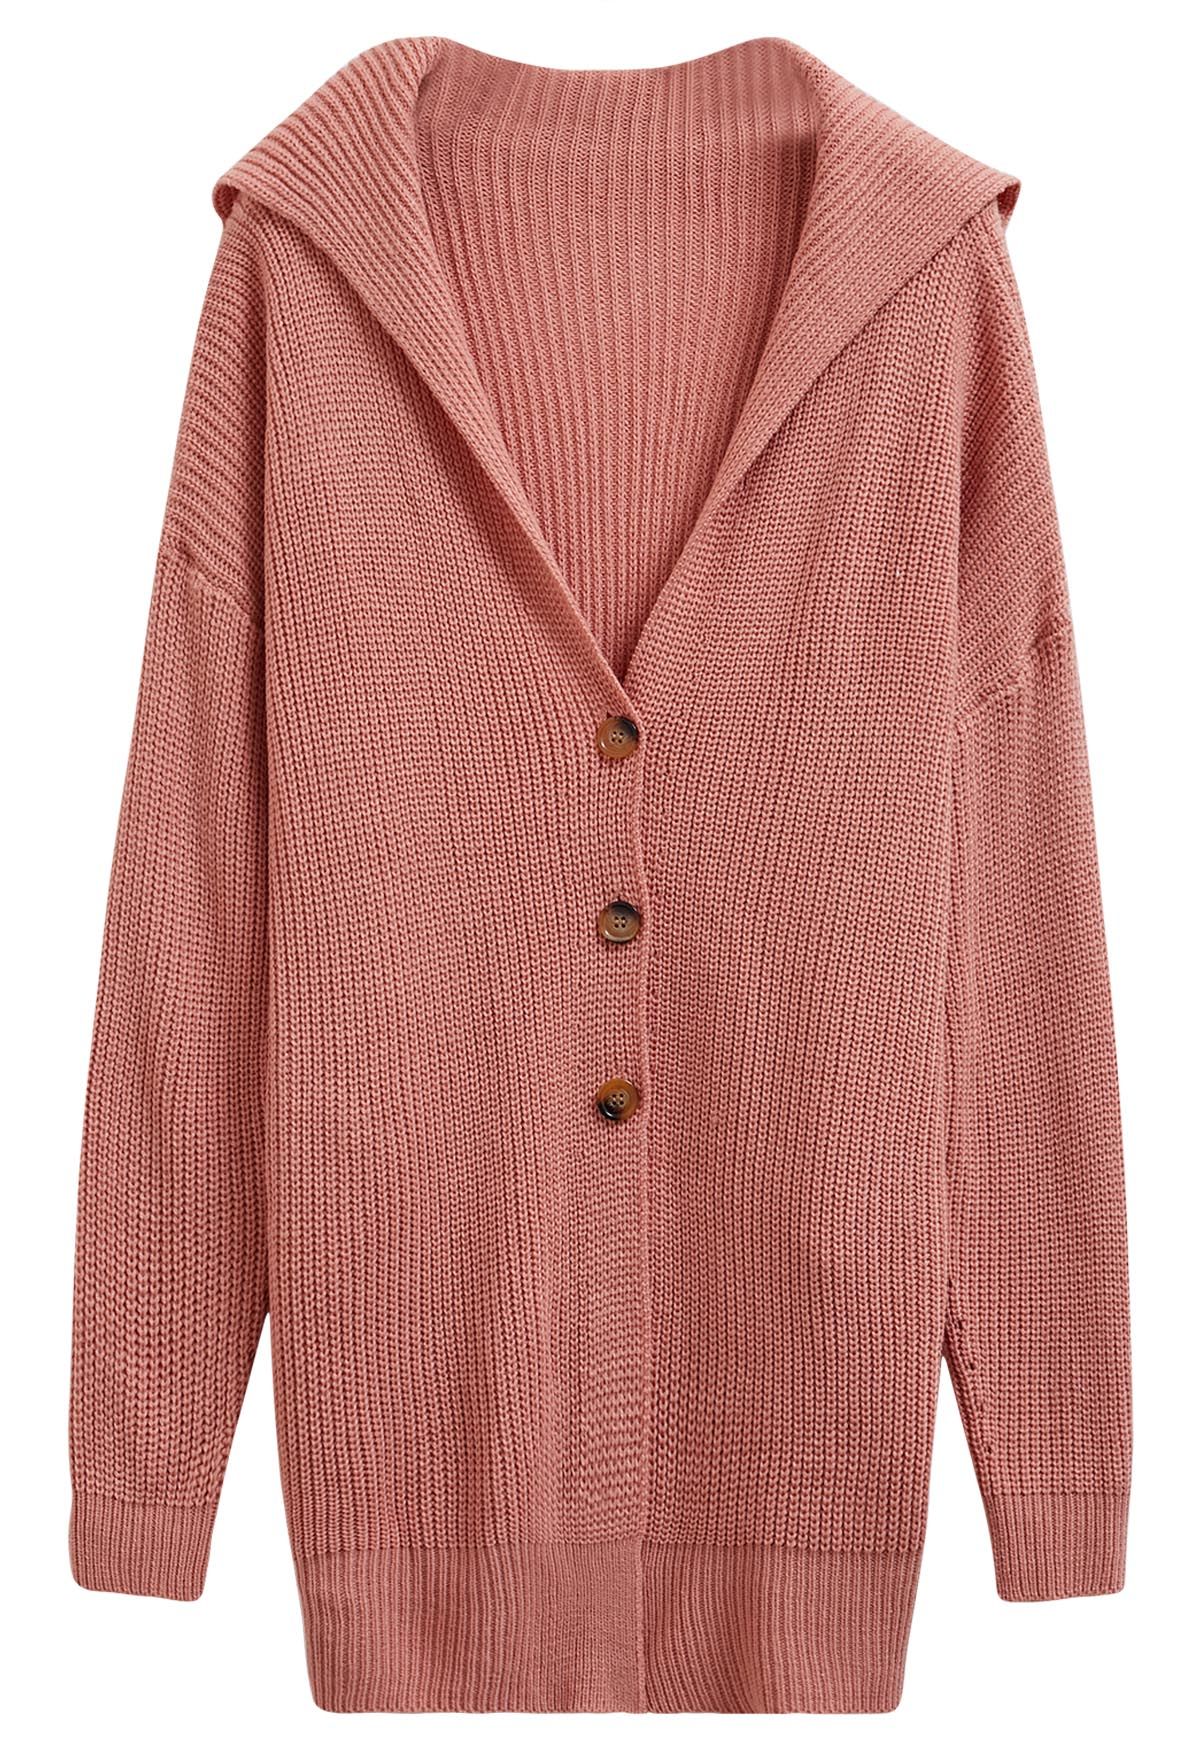 Coral Pointelle Button Down Cardigan